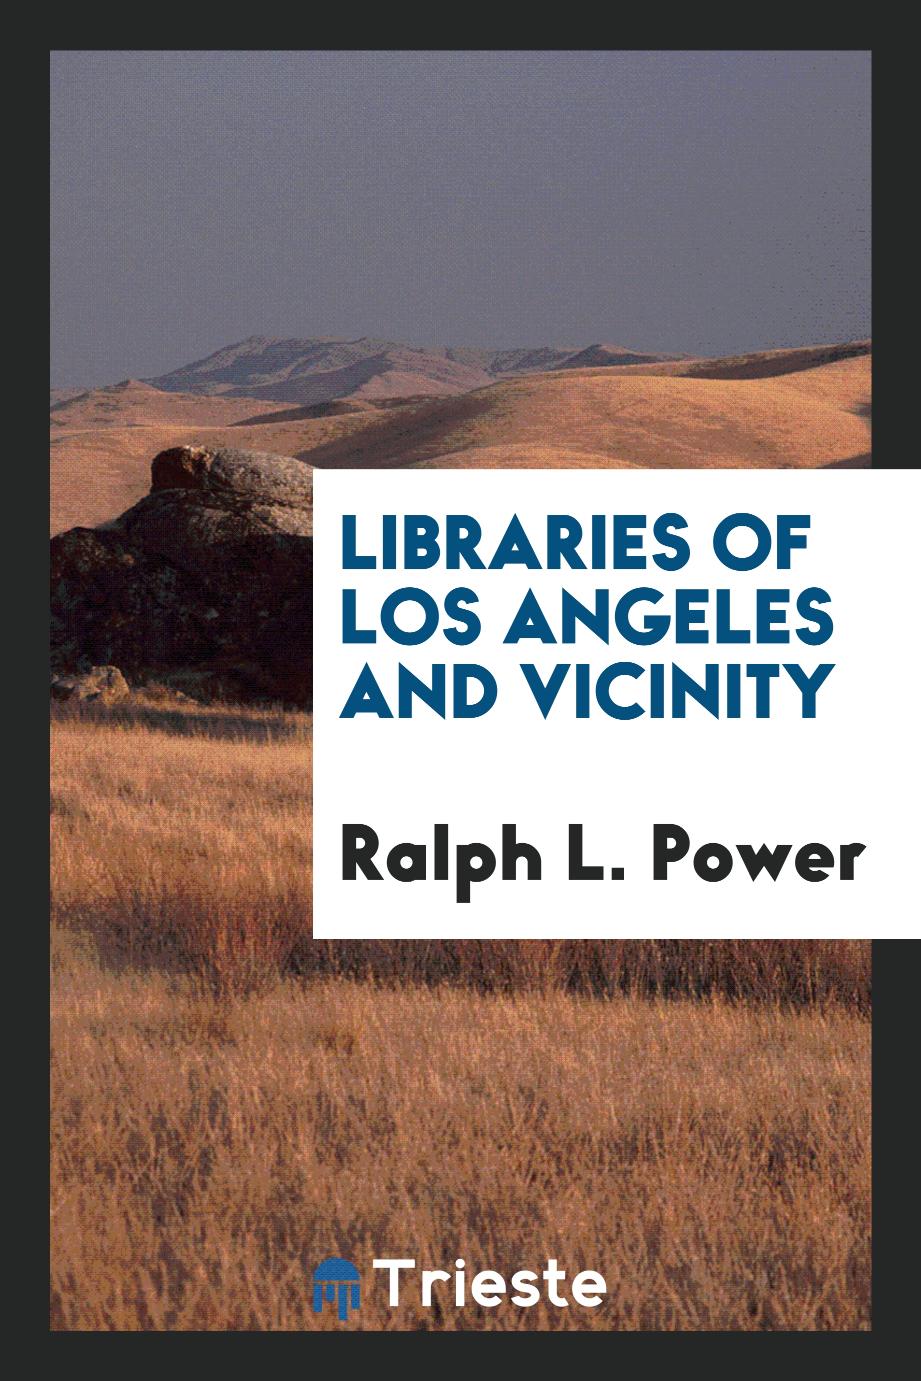 Libraries of Los Angeles and Vicinity